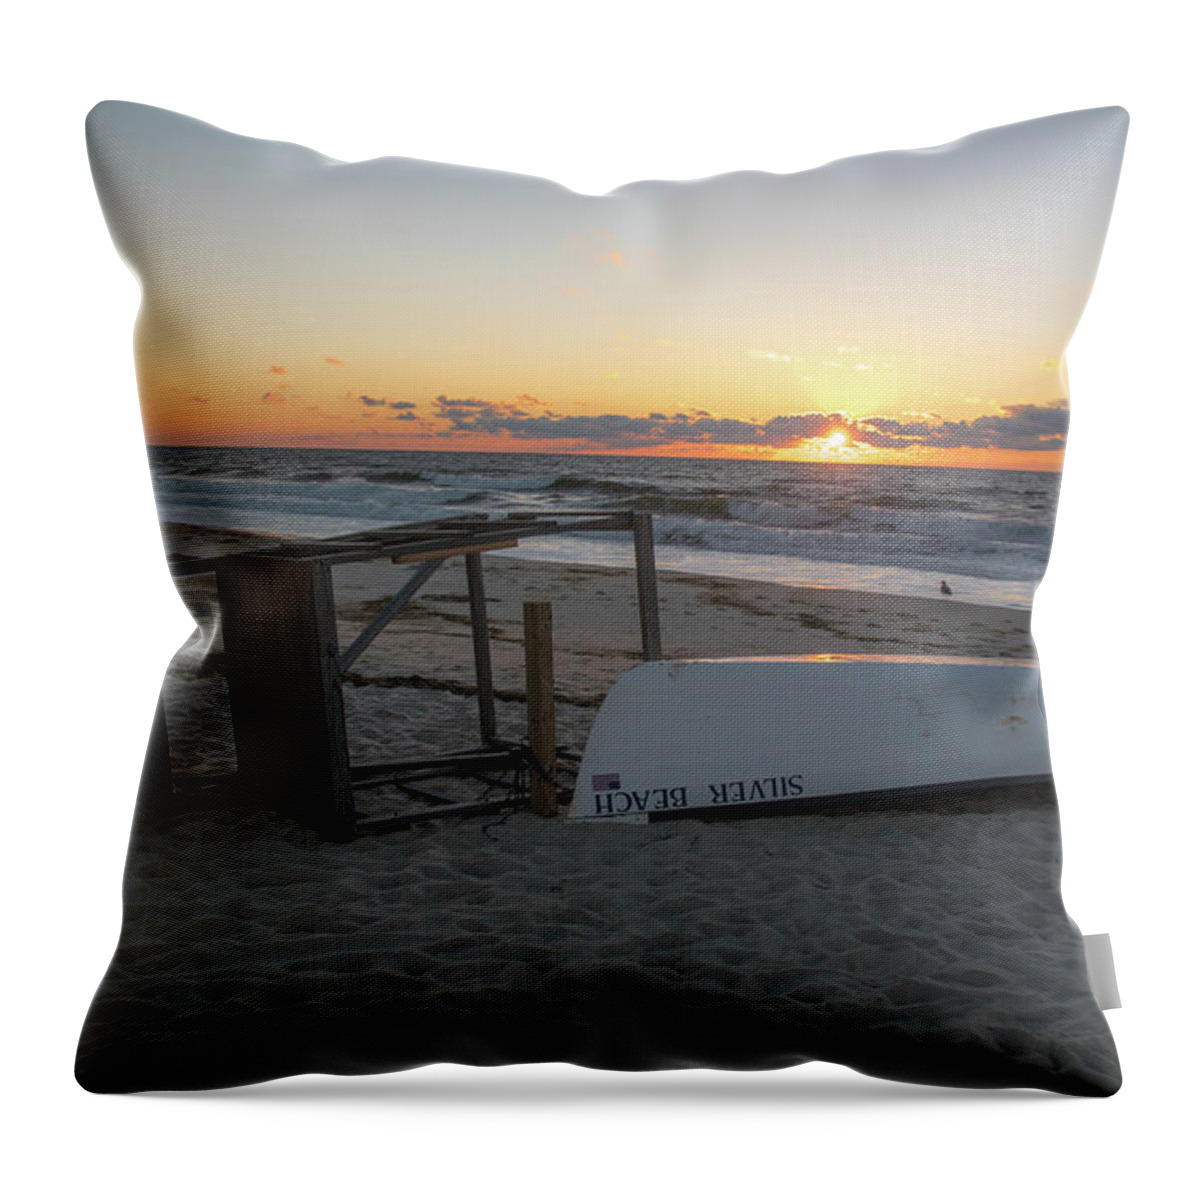 Jersey Shore Sunrise Throw Pillow featuring the photograph Jersey Shore Sunrise by Matthew DeGrushe